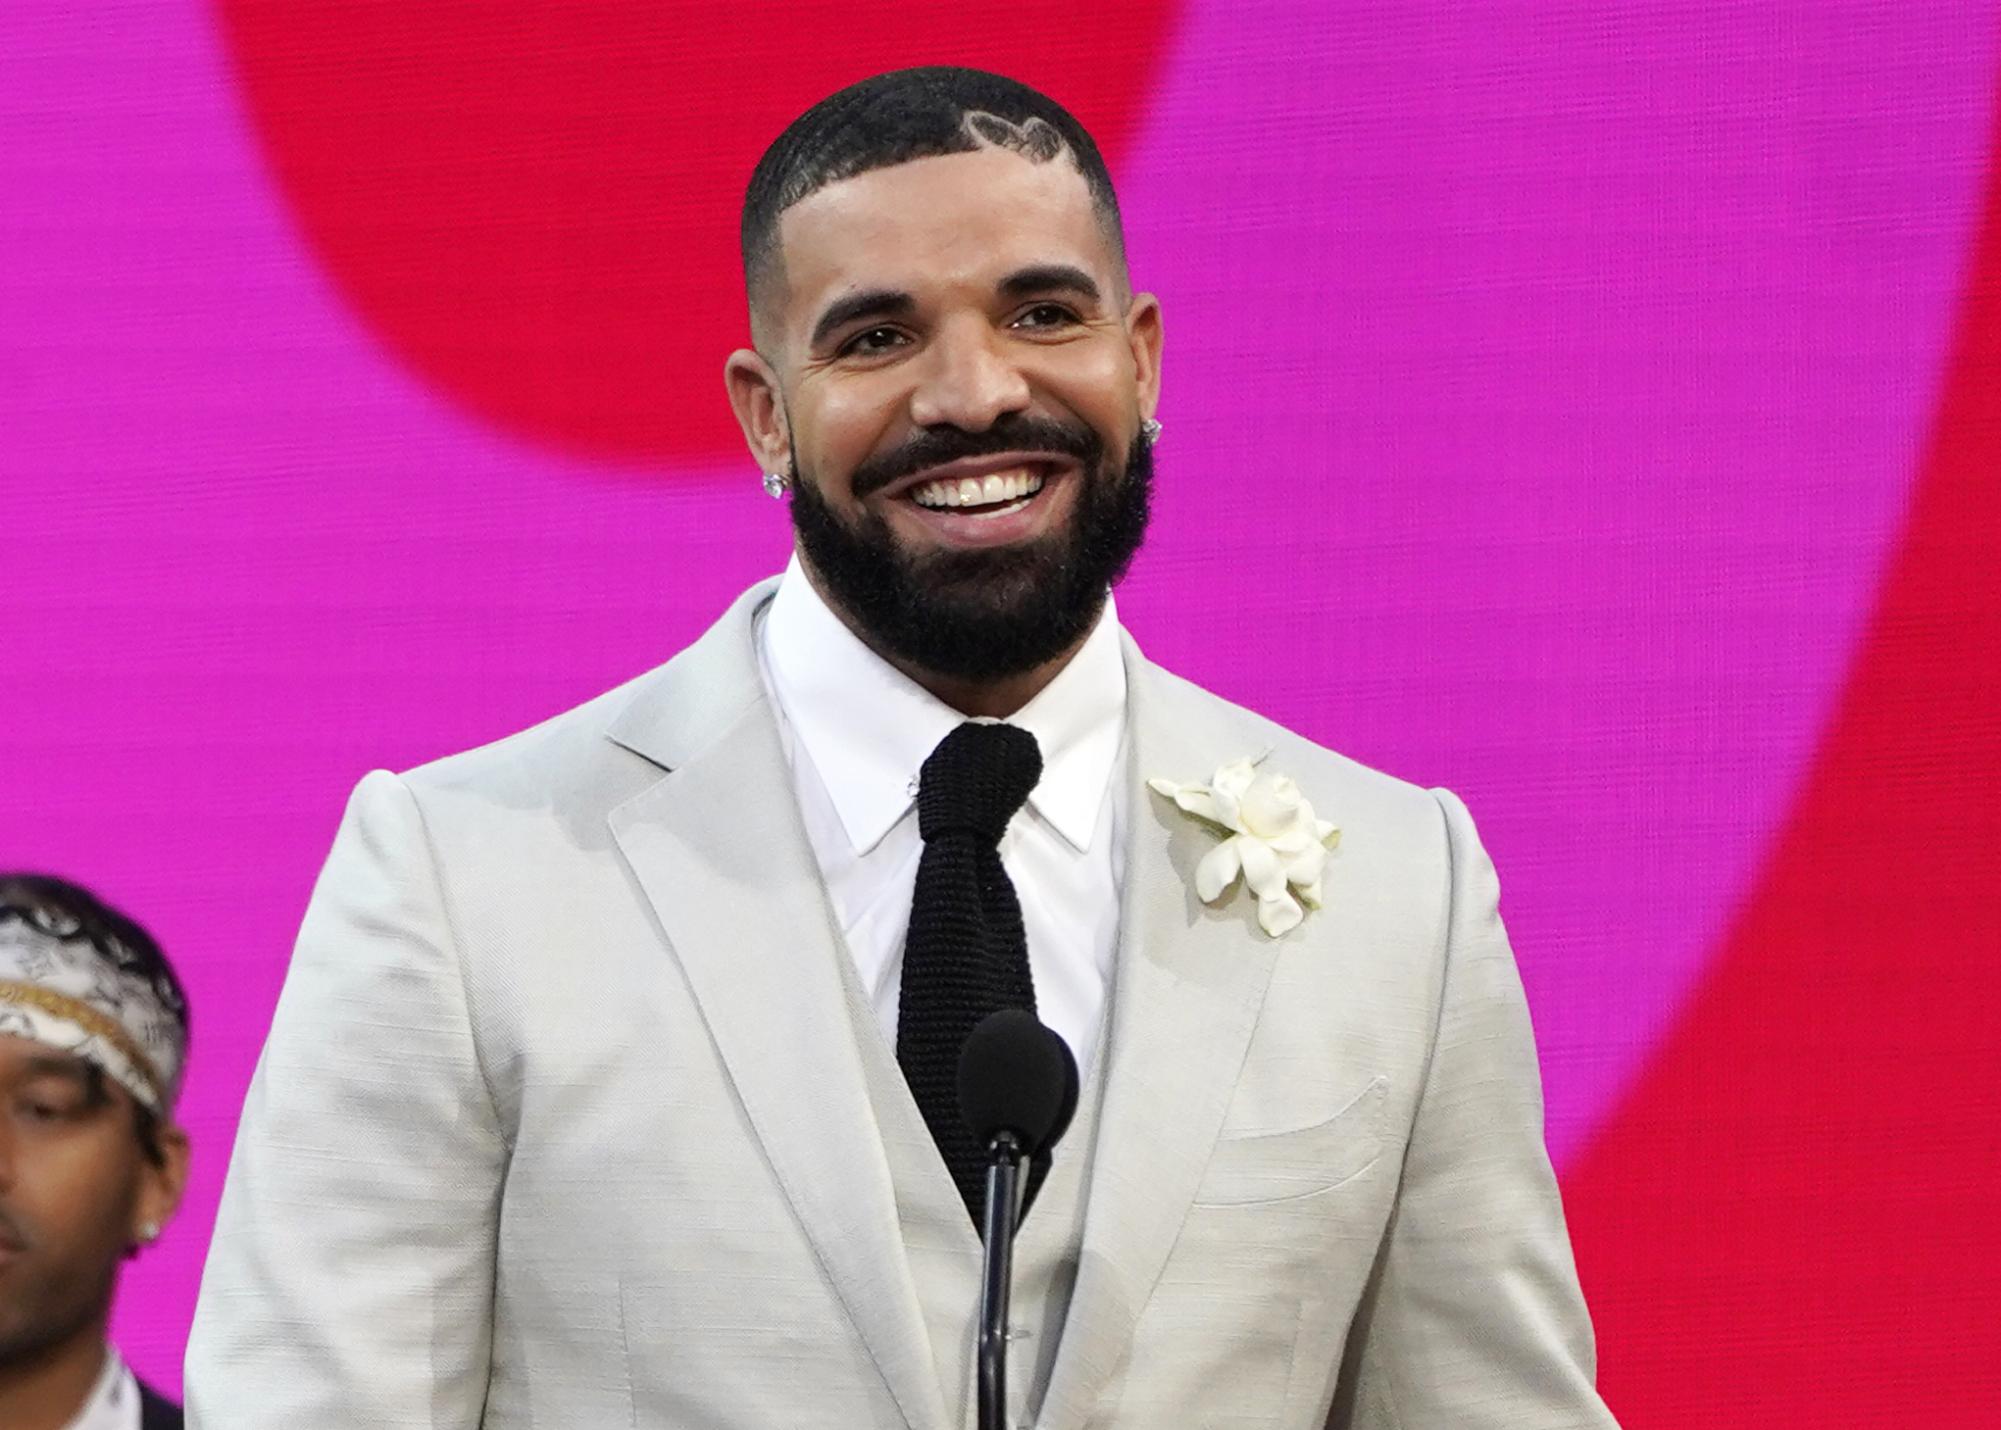 Drake announced For All the Dogs at the Billboard Music Awards in 2021. The album was released on Oct. 6.

Courtesy of AP News Photos